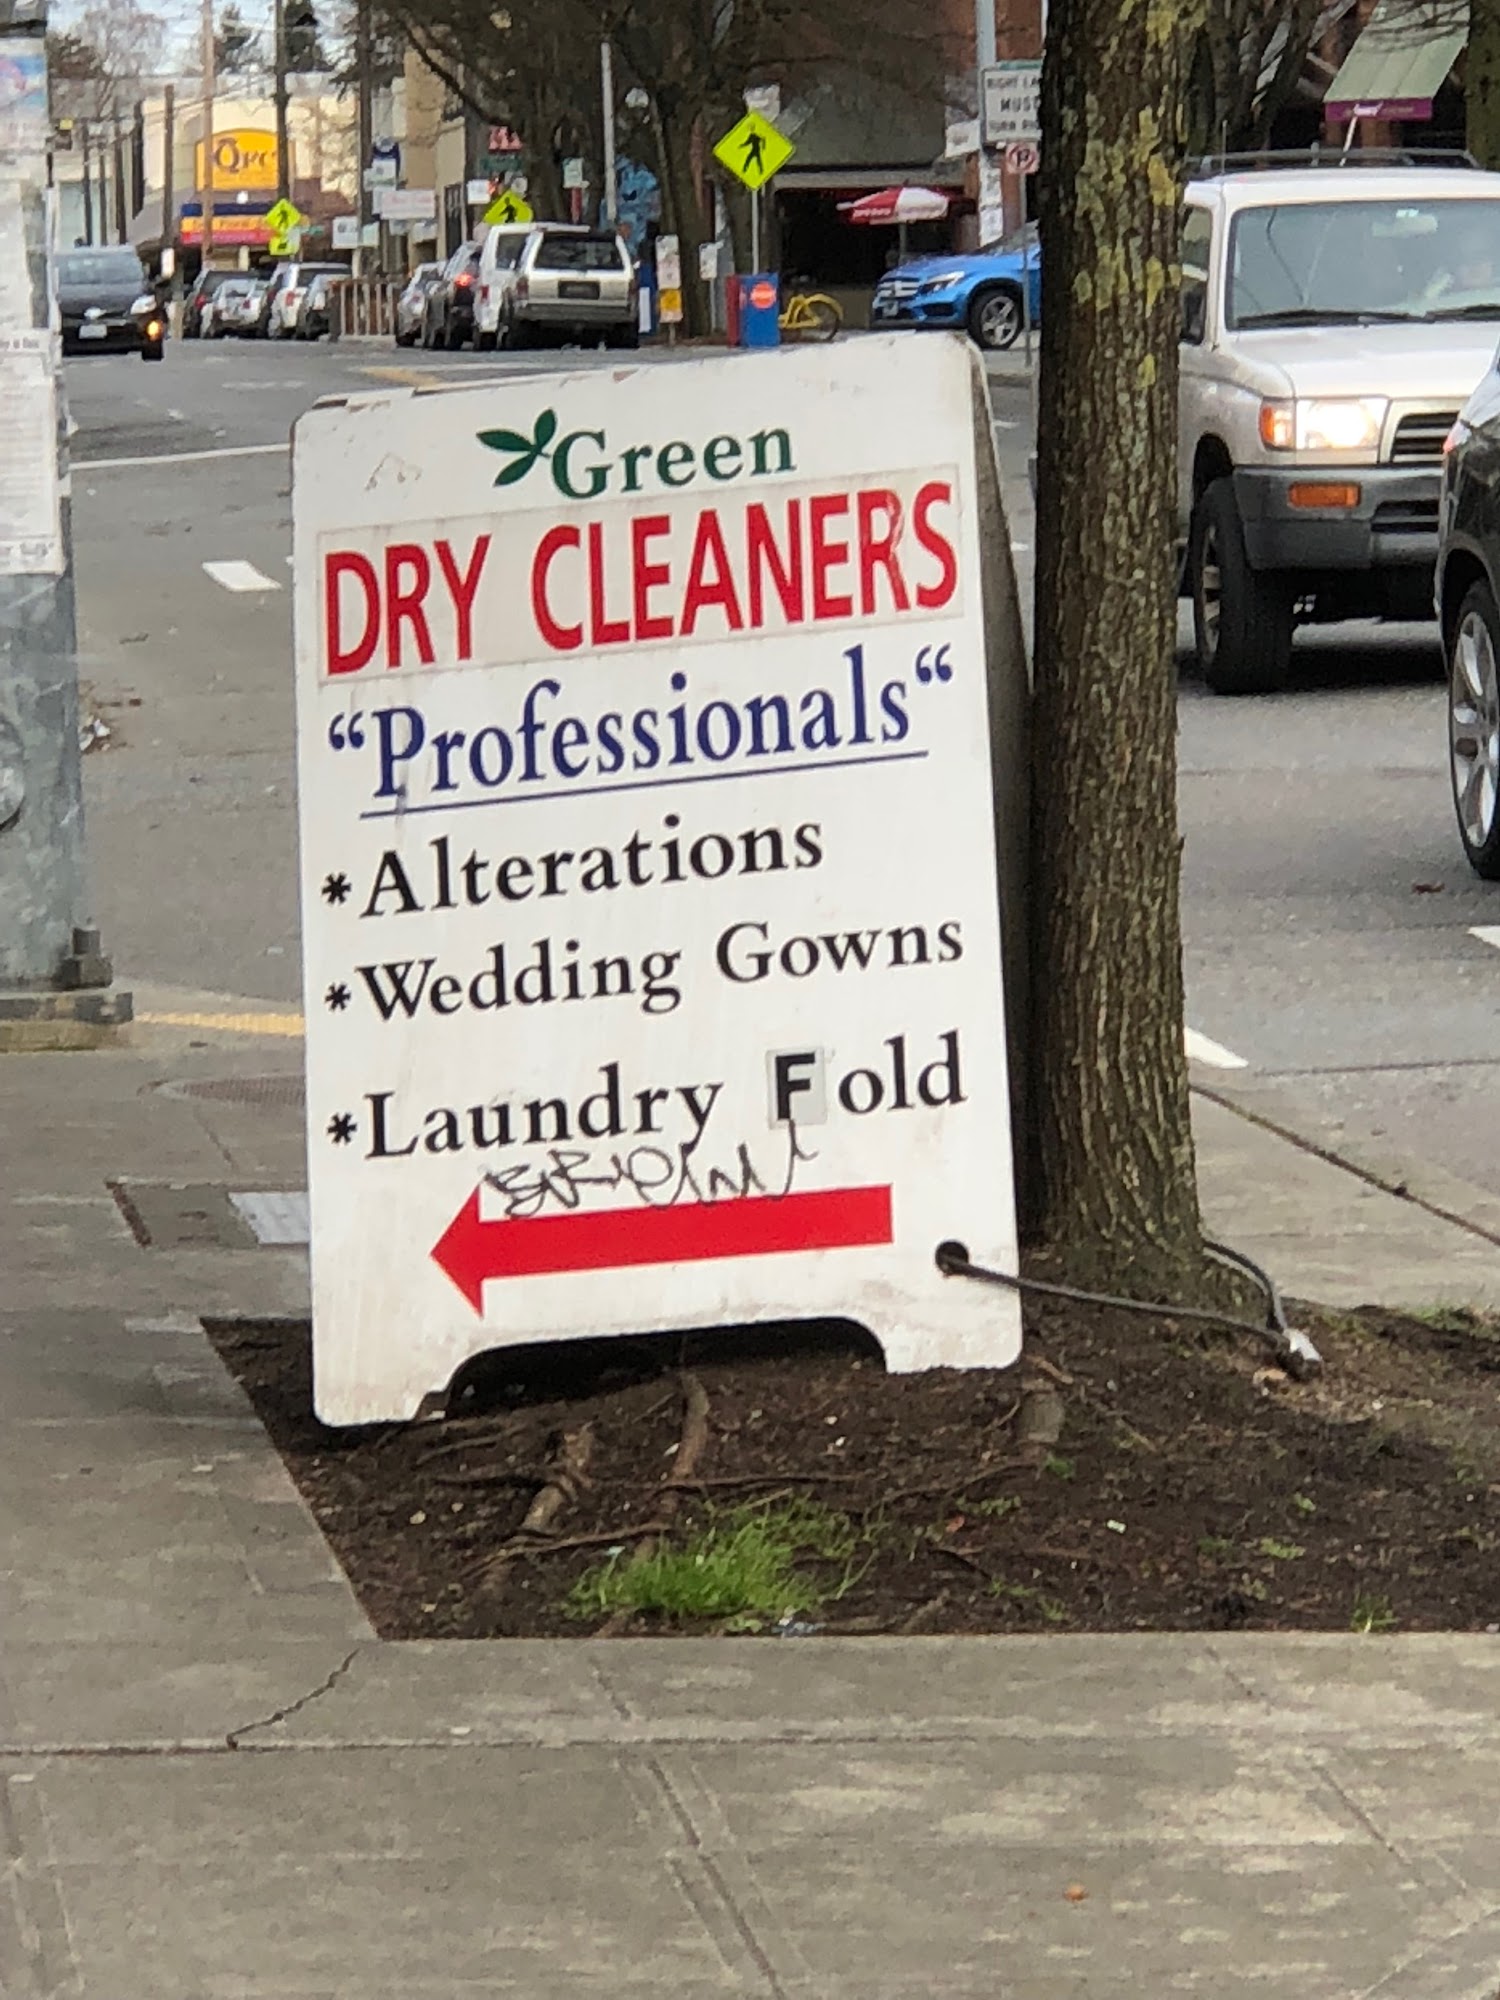 Green Dry Cleaners